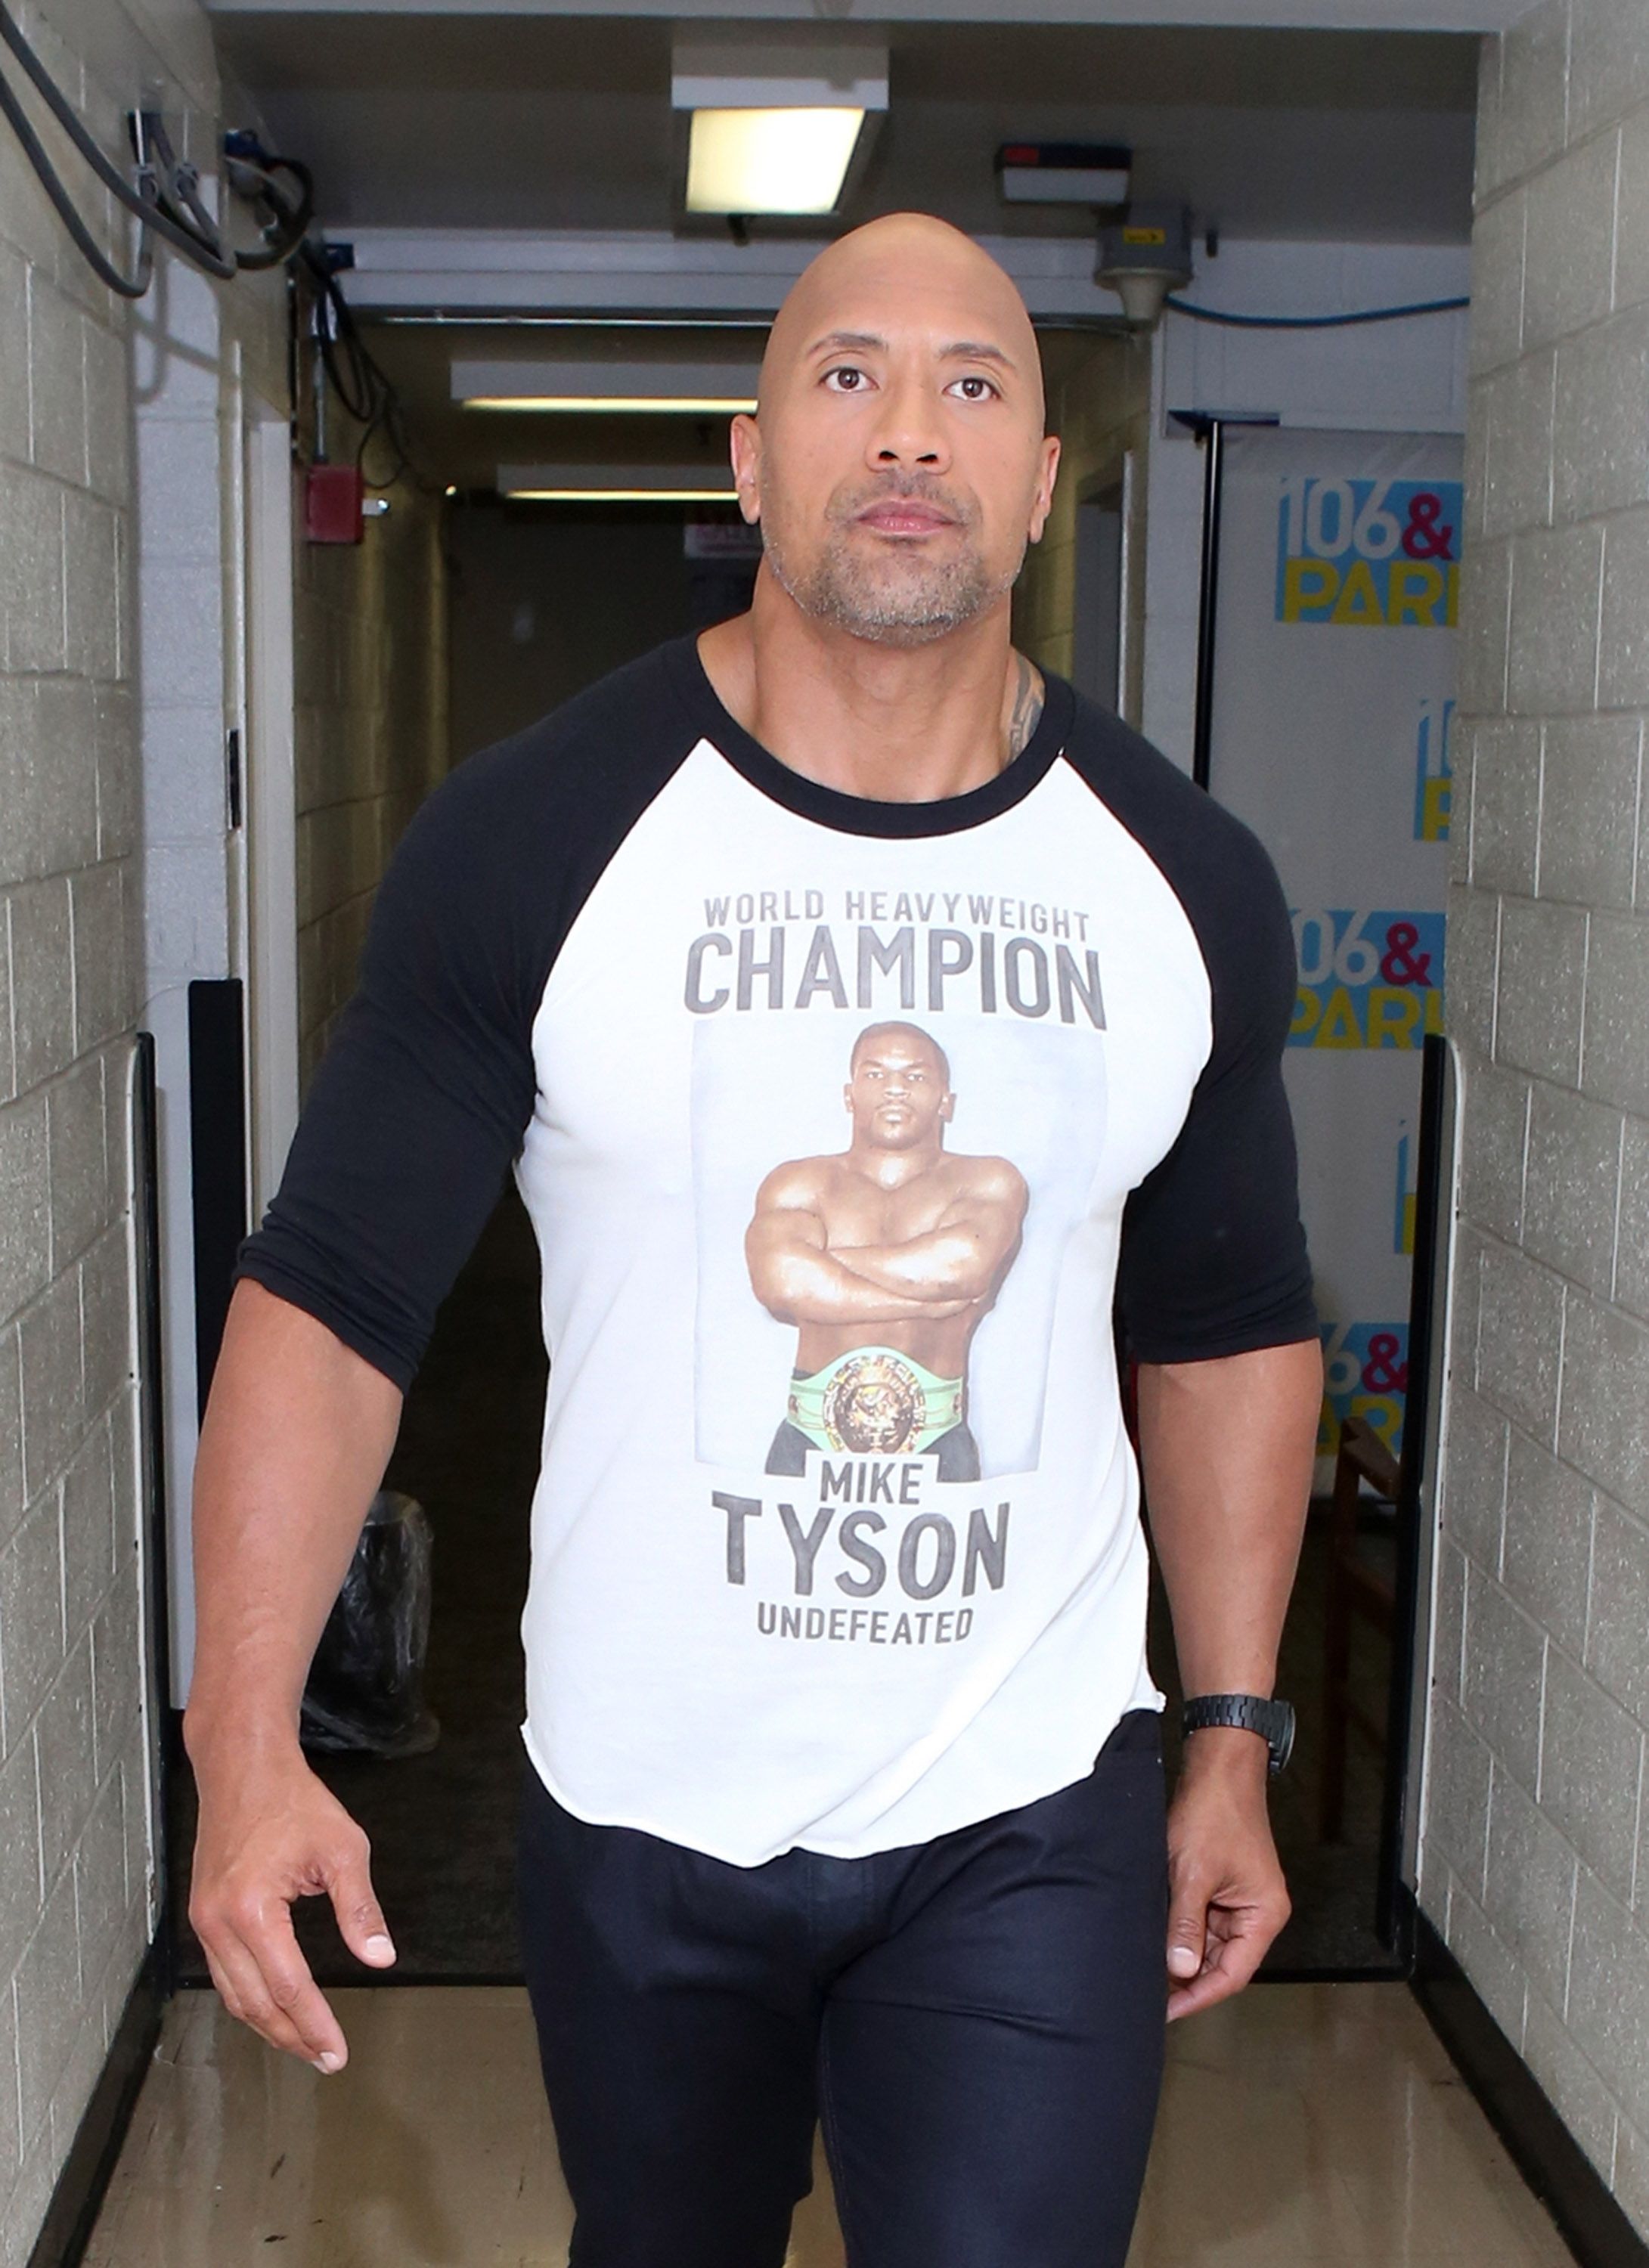 Dwayne Johnson at the 106 & Park at BET studio on July 22, 2014 in New York City. | Source: Getty Images